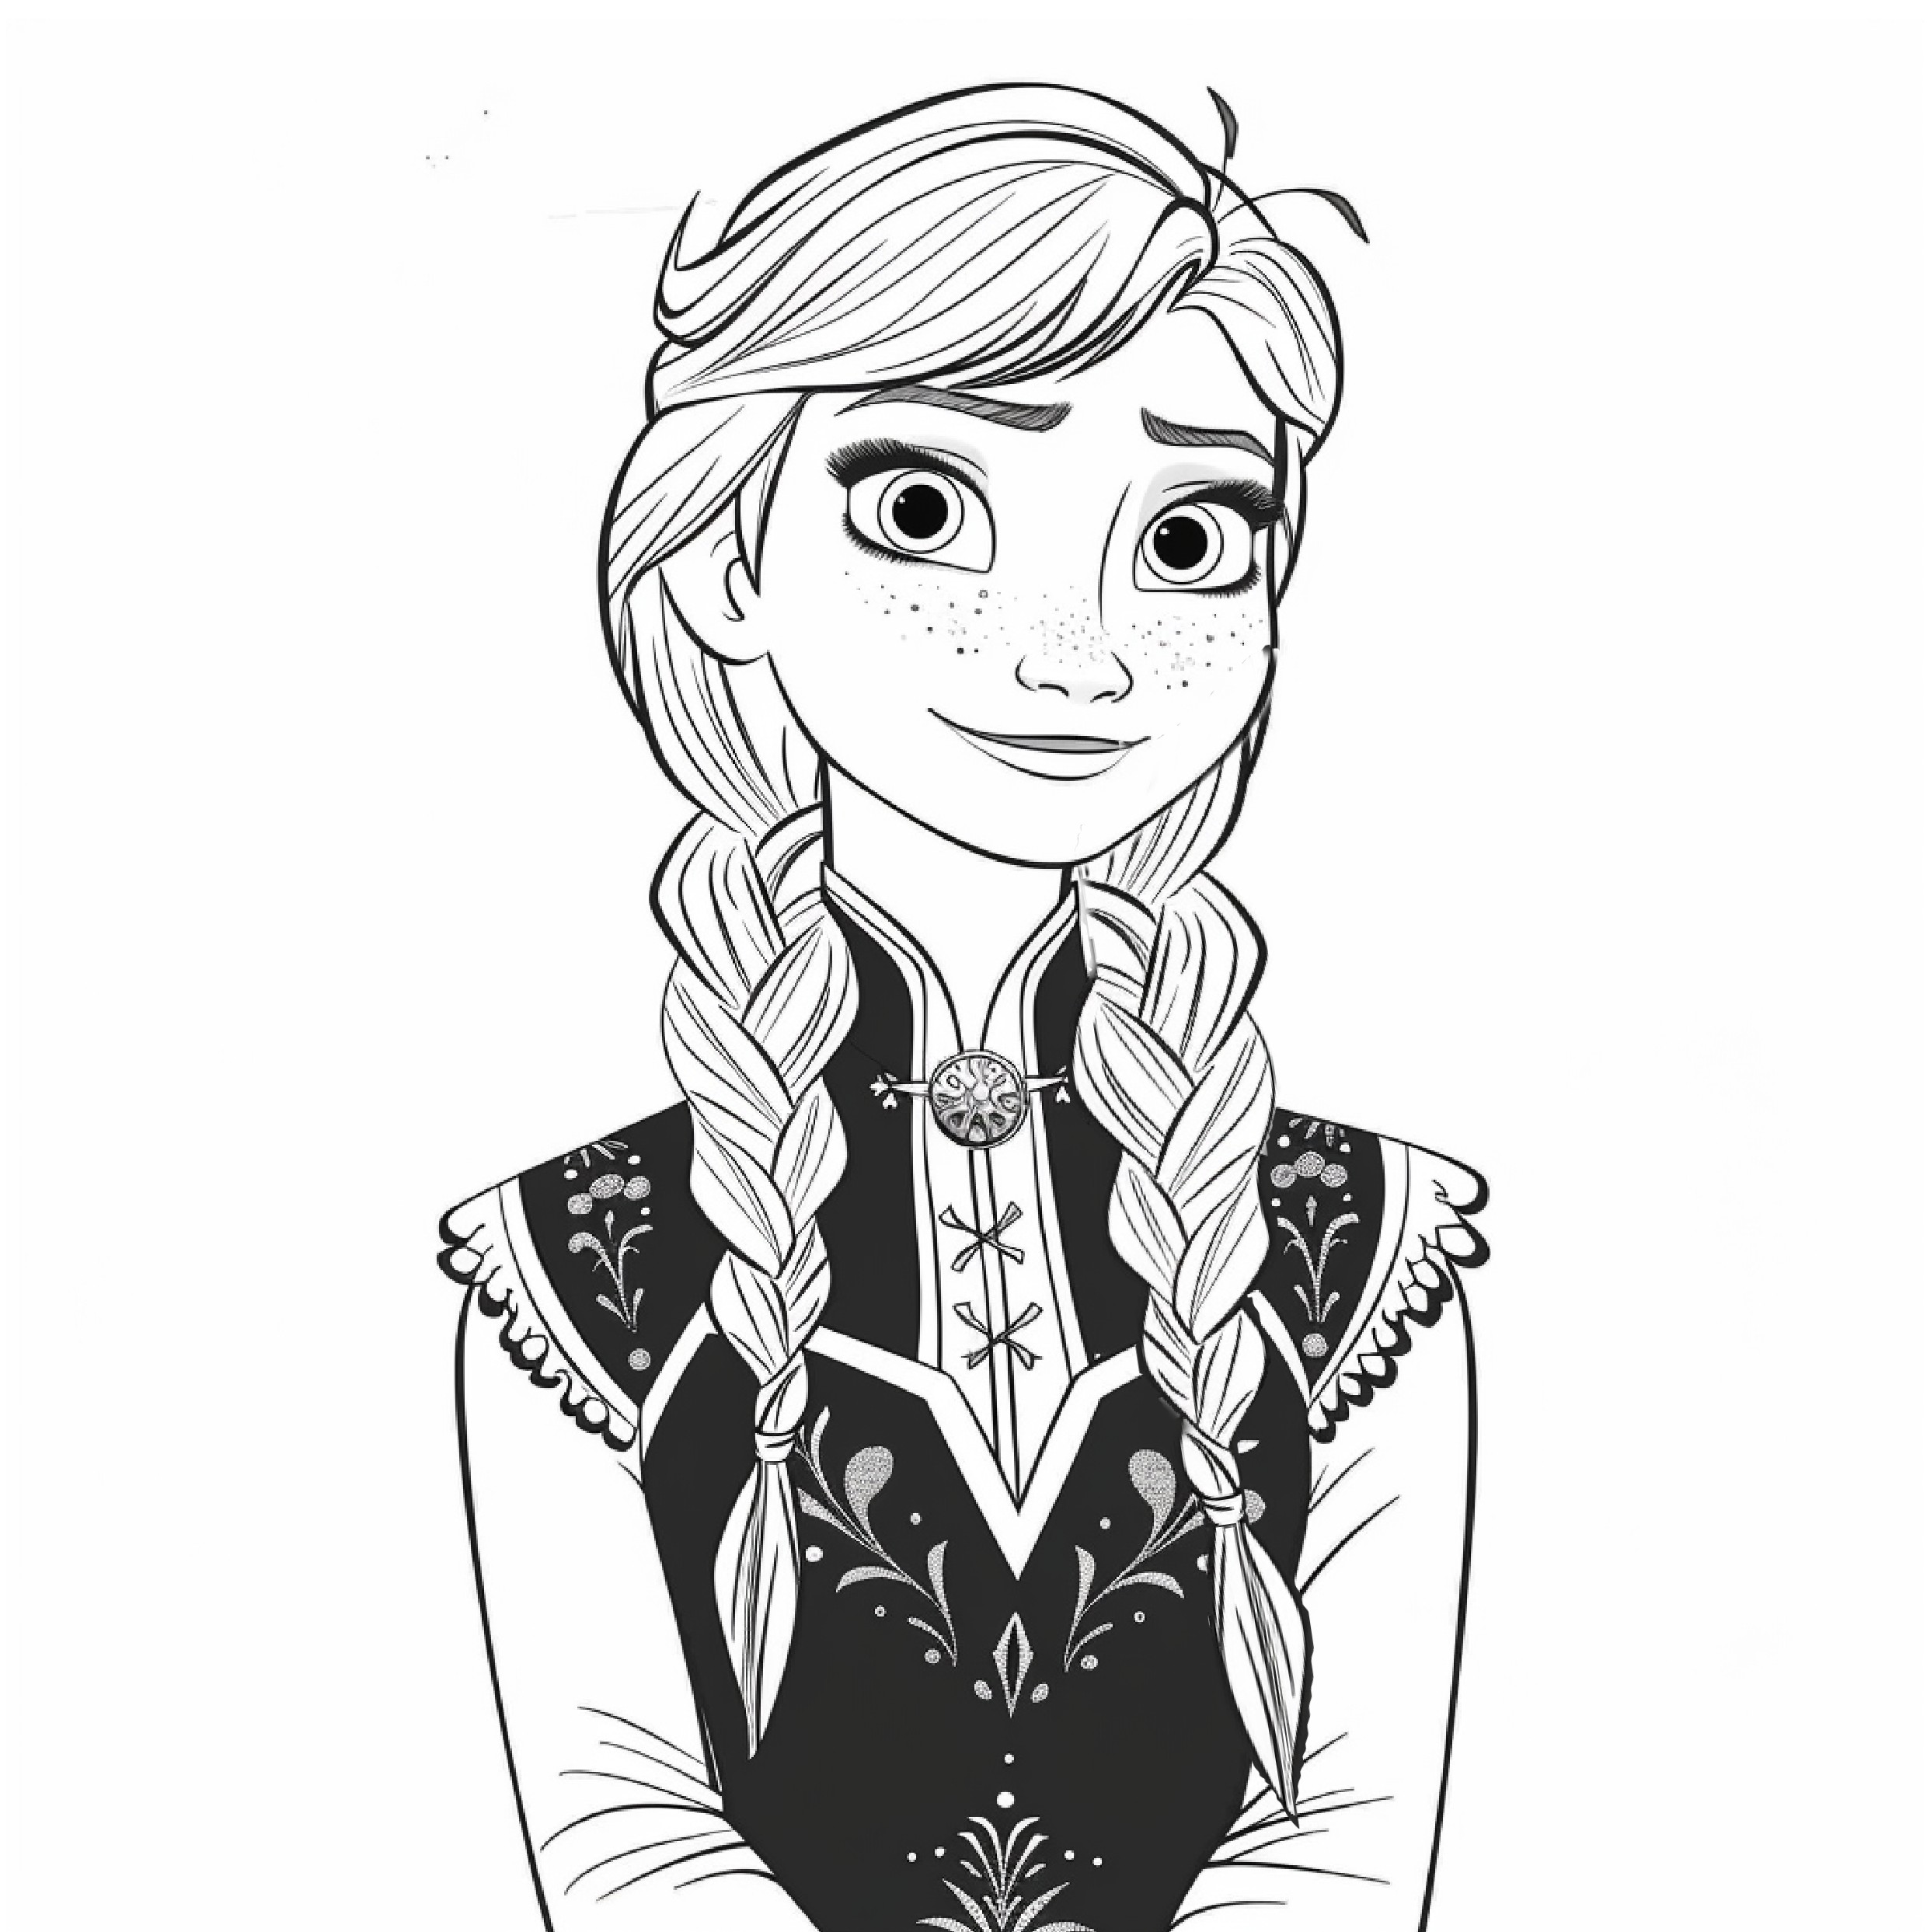 Anna 04 von Frozen coloring page to print and coloring